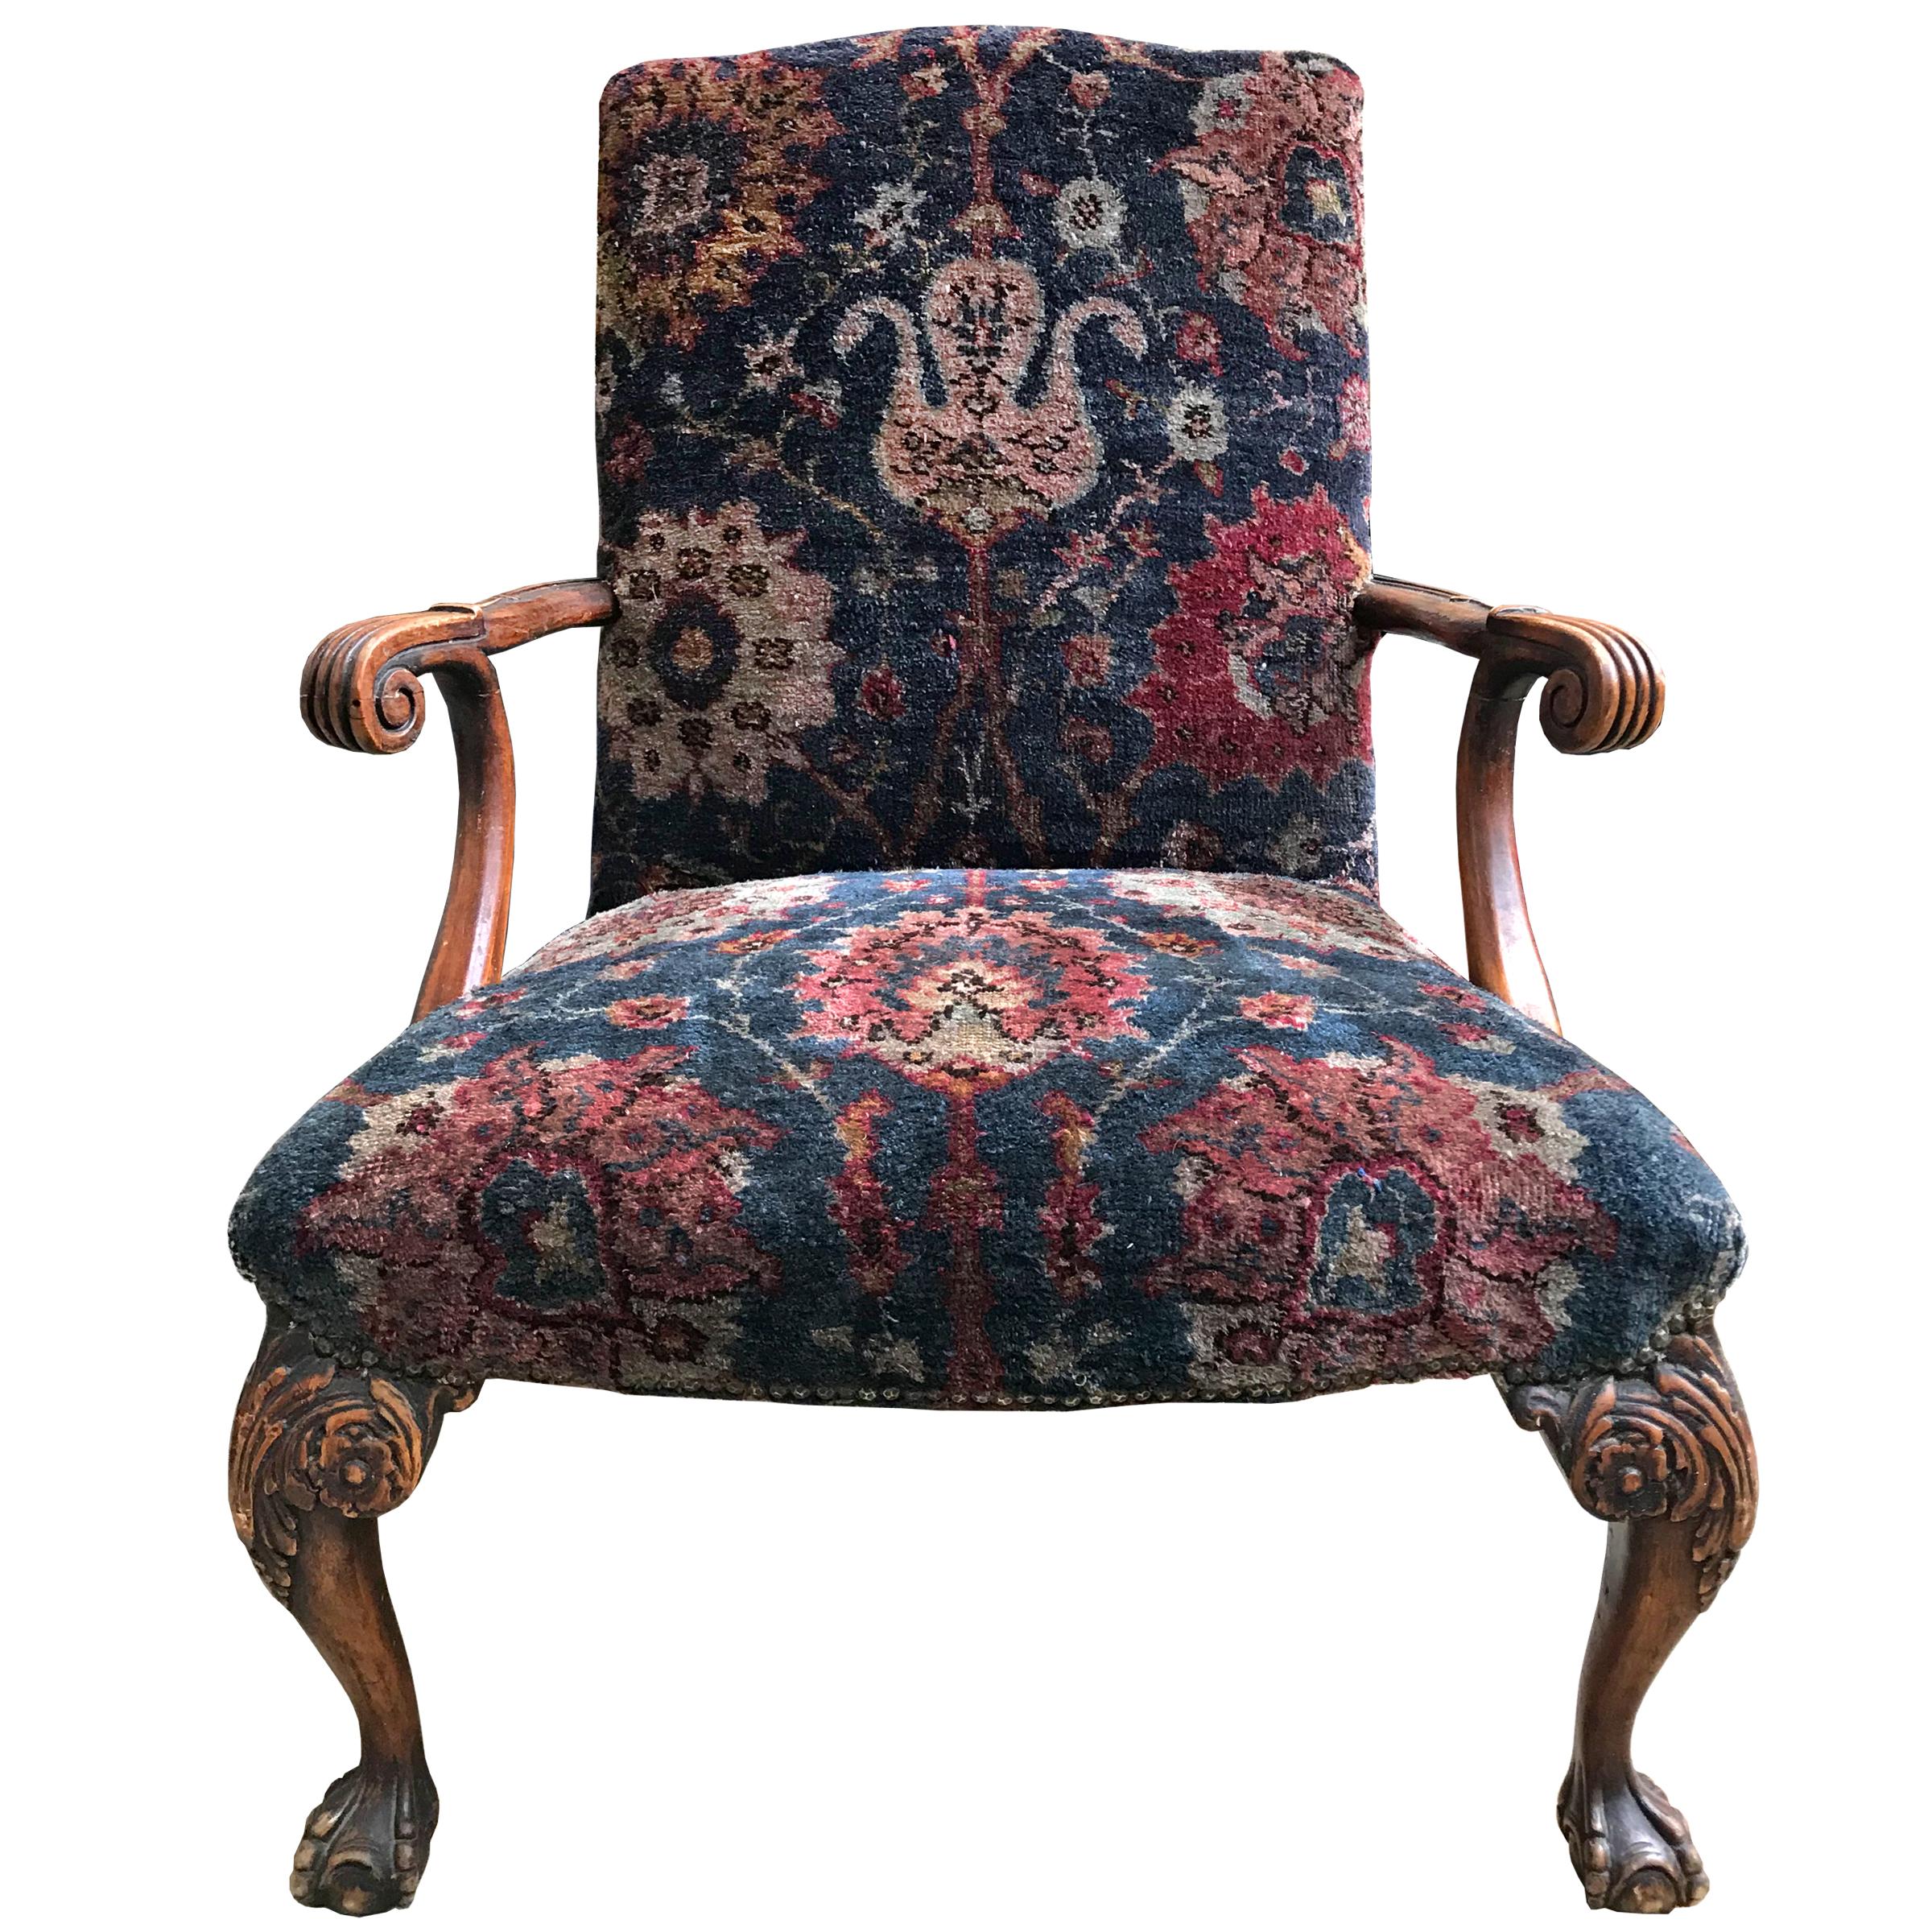 A 19th century Georgian period armchair with curved and scroll carved arms, claw and ball feet, and a wide straight back. The footrest has bun feet. Both have been upholstered in the same 19th century Persian rug, with nailhead trim. 

Dimensions